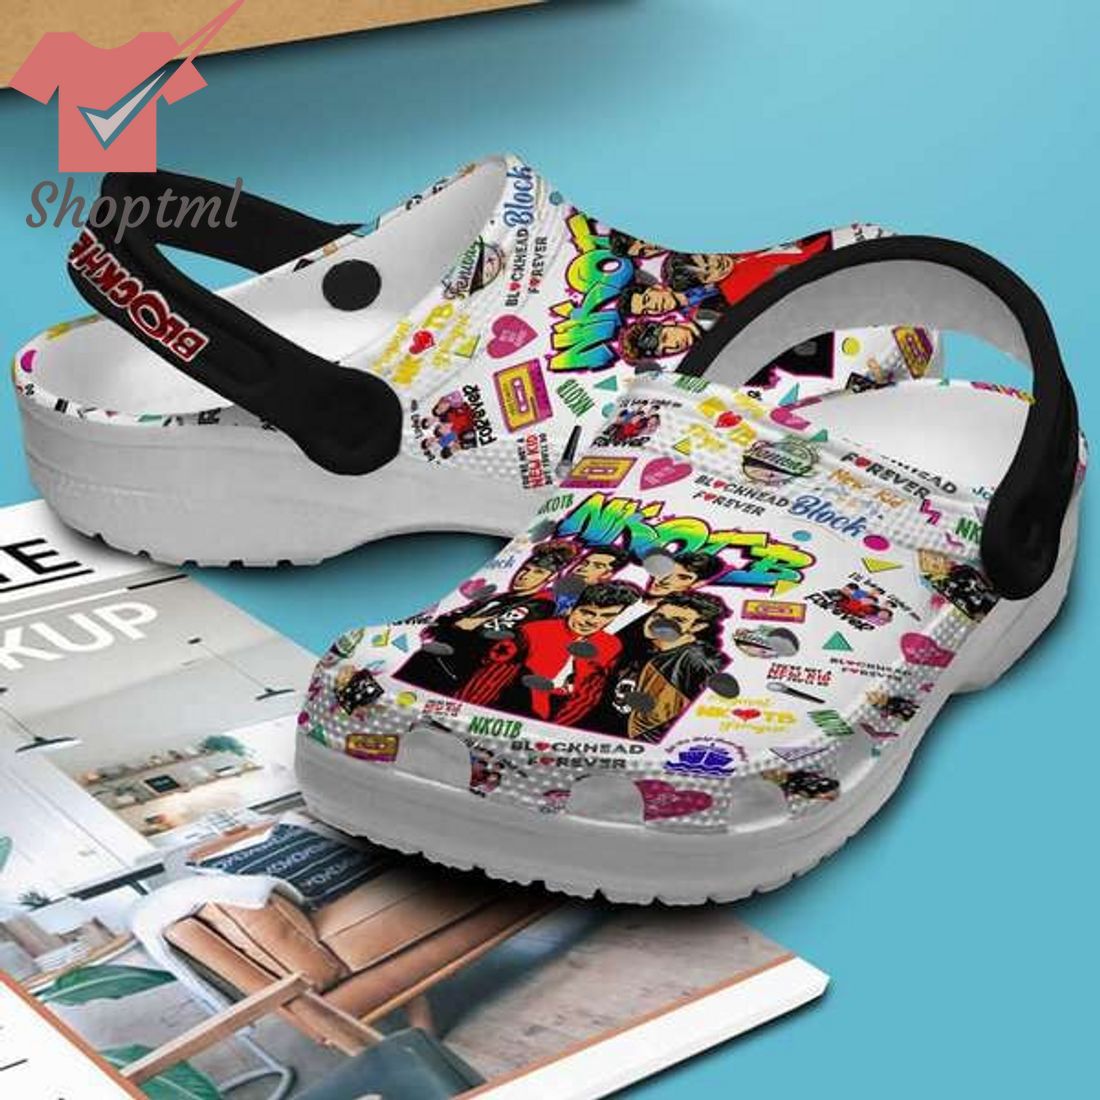 New Kids on the Block Head Forever Crocs Clog Shoes